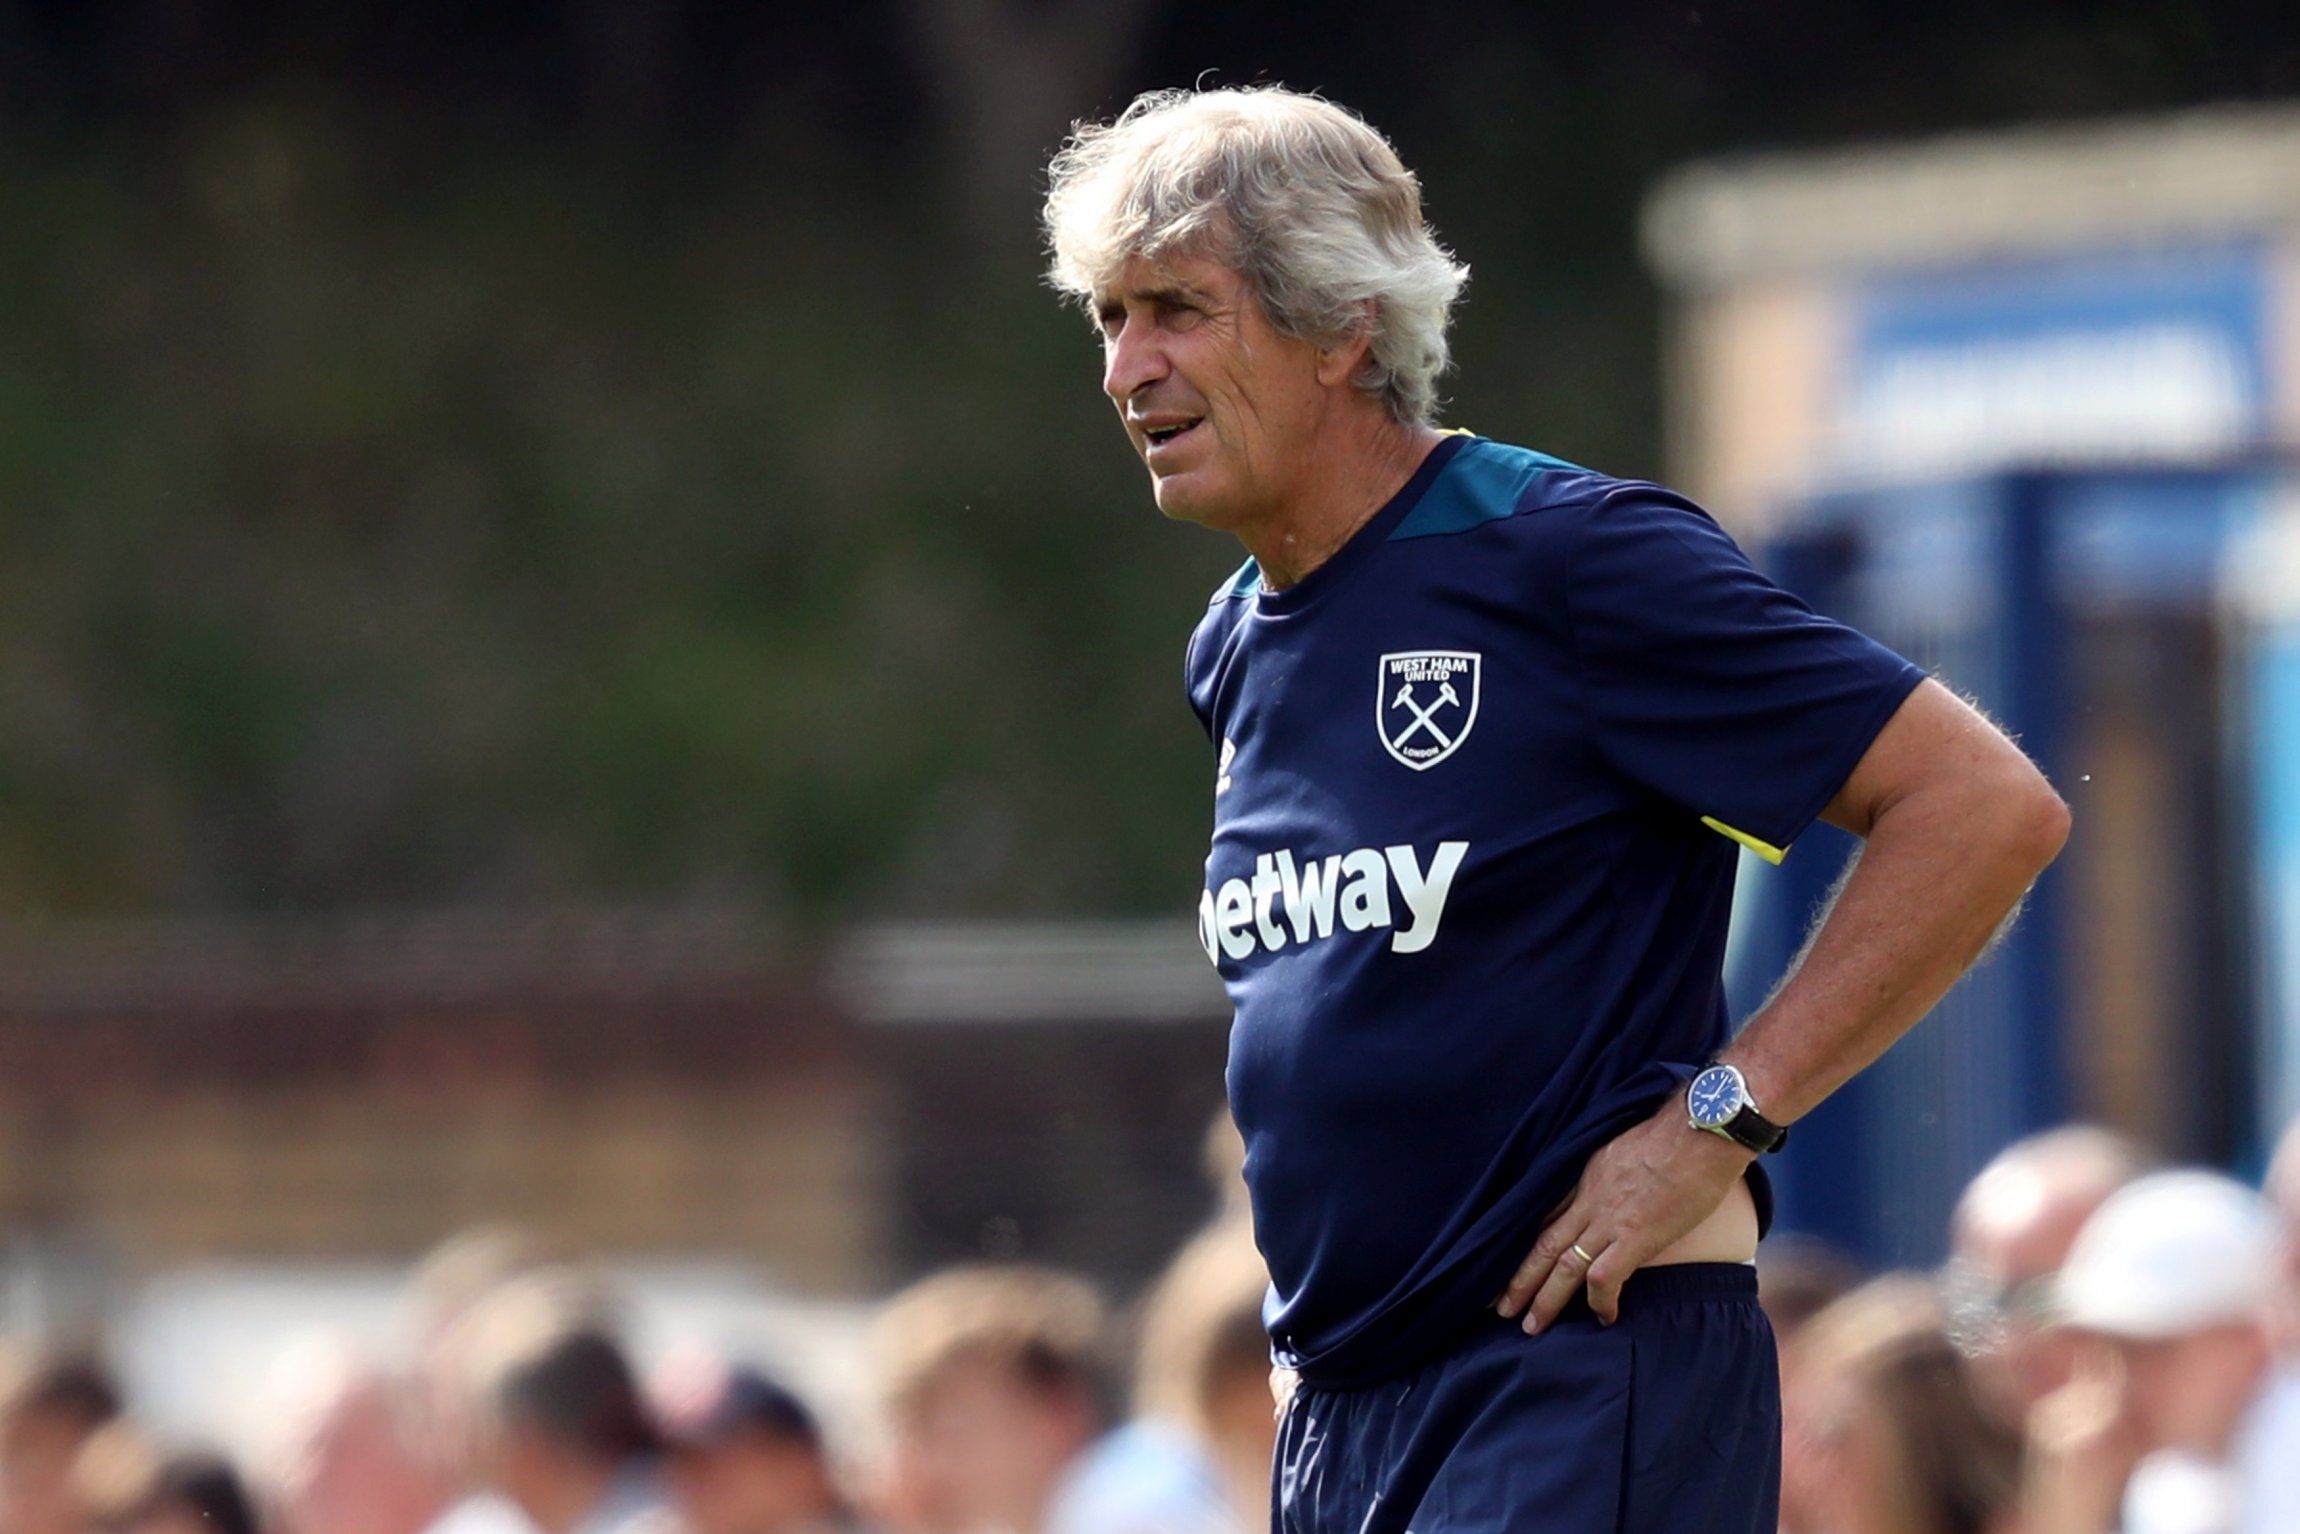 Manuel Pellegrini watches from the touchline as West Ham United face Wycombe Wanderers